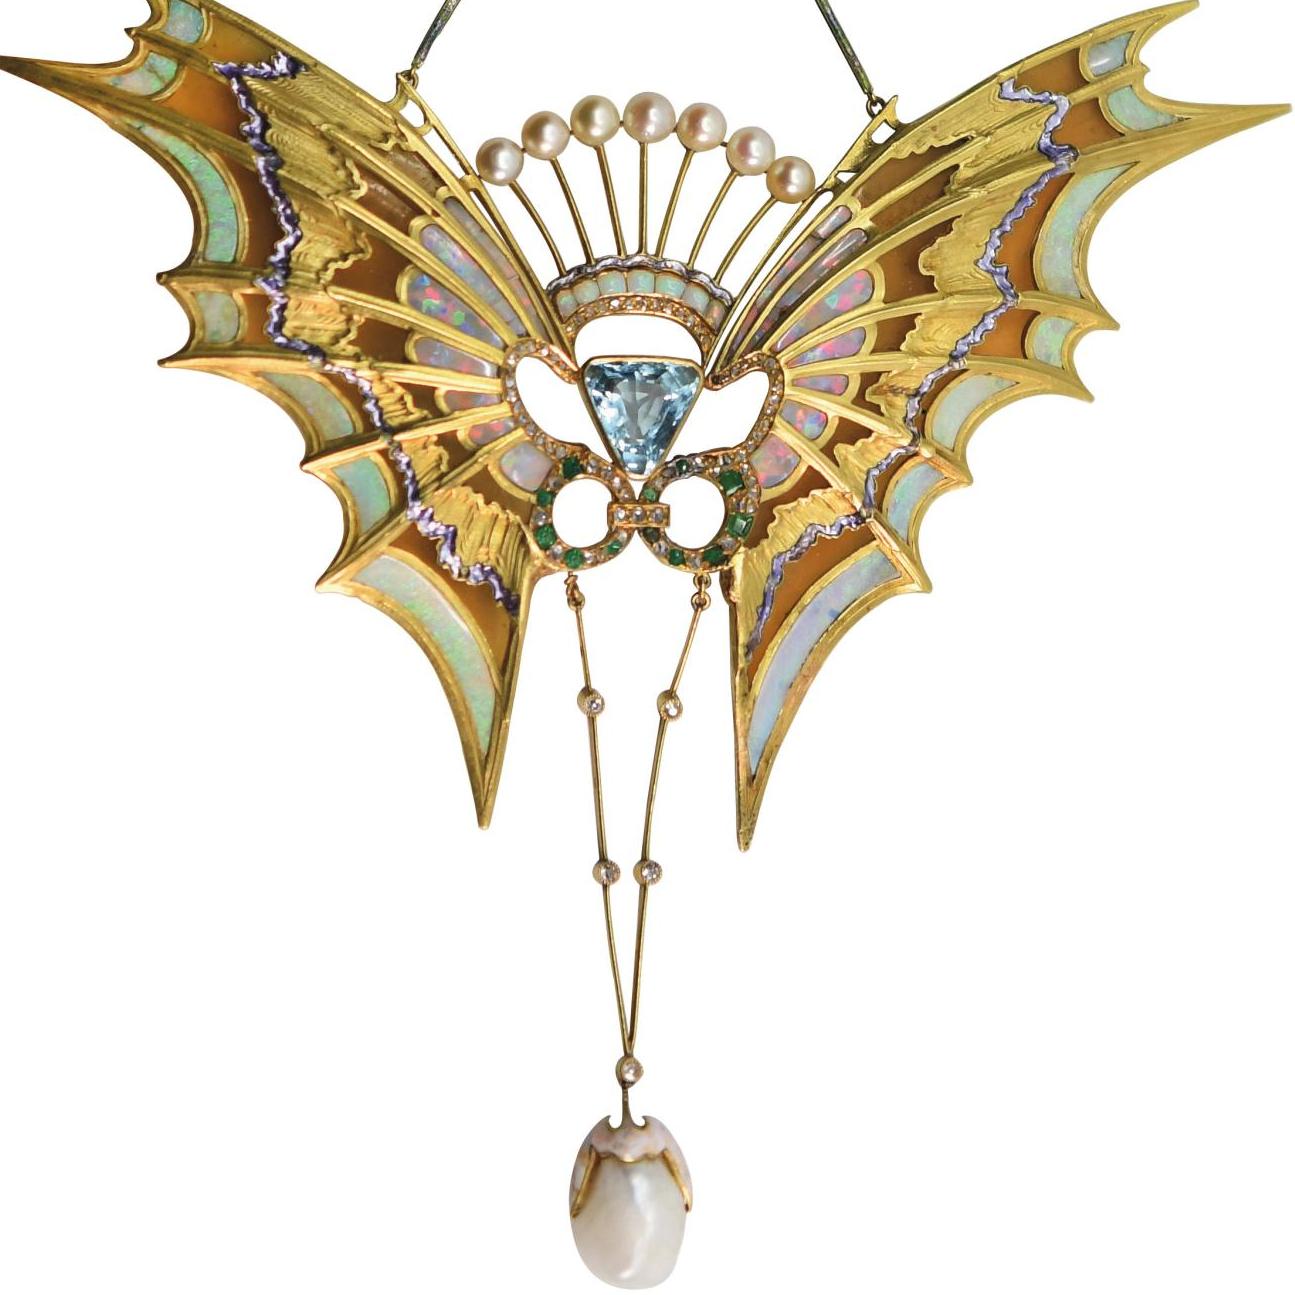 The Wings and Legs of Art Nouveau - Lots sold